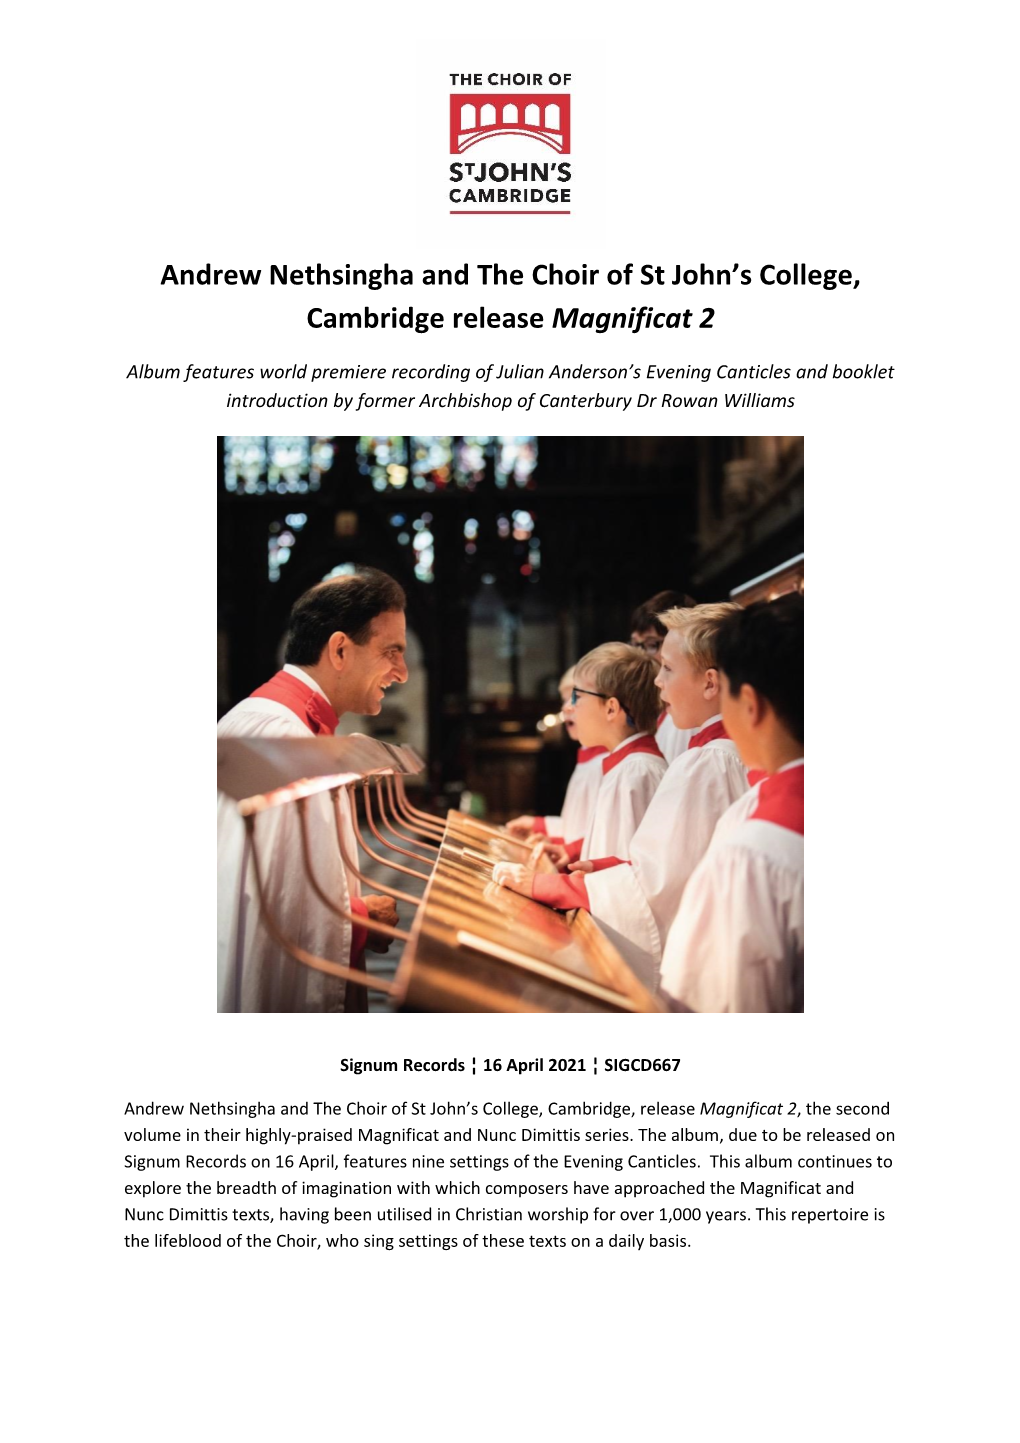 Andrew Nethsingha and the Choir of St John's College